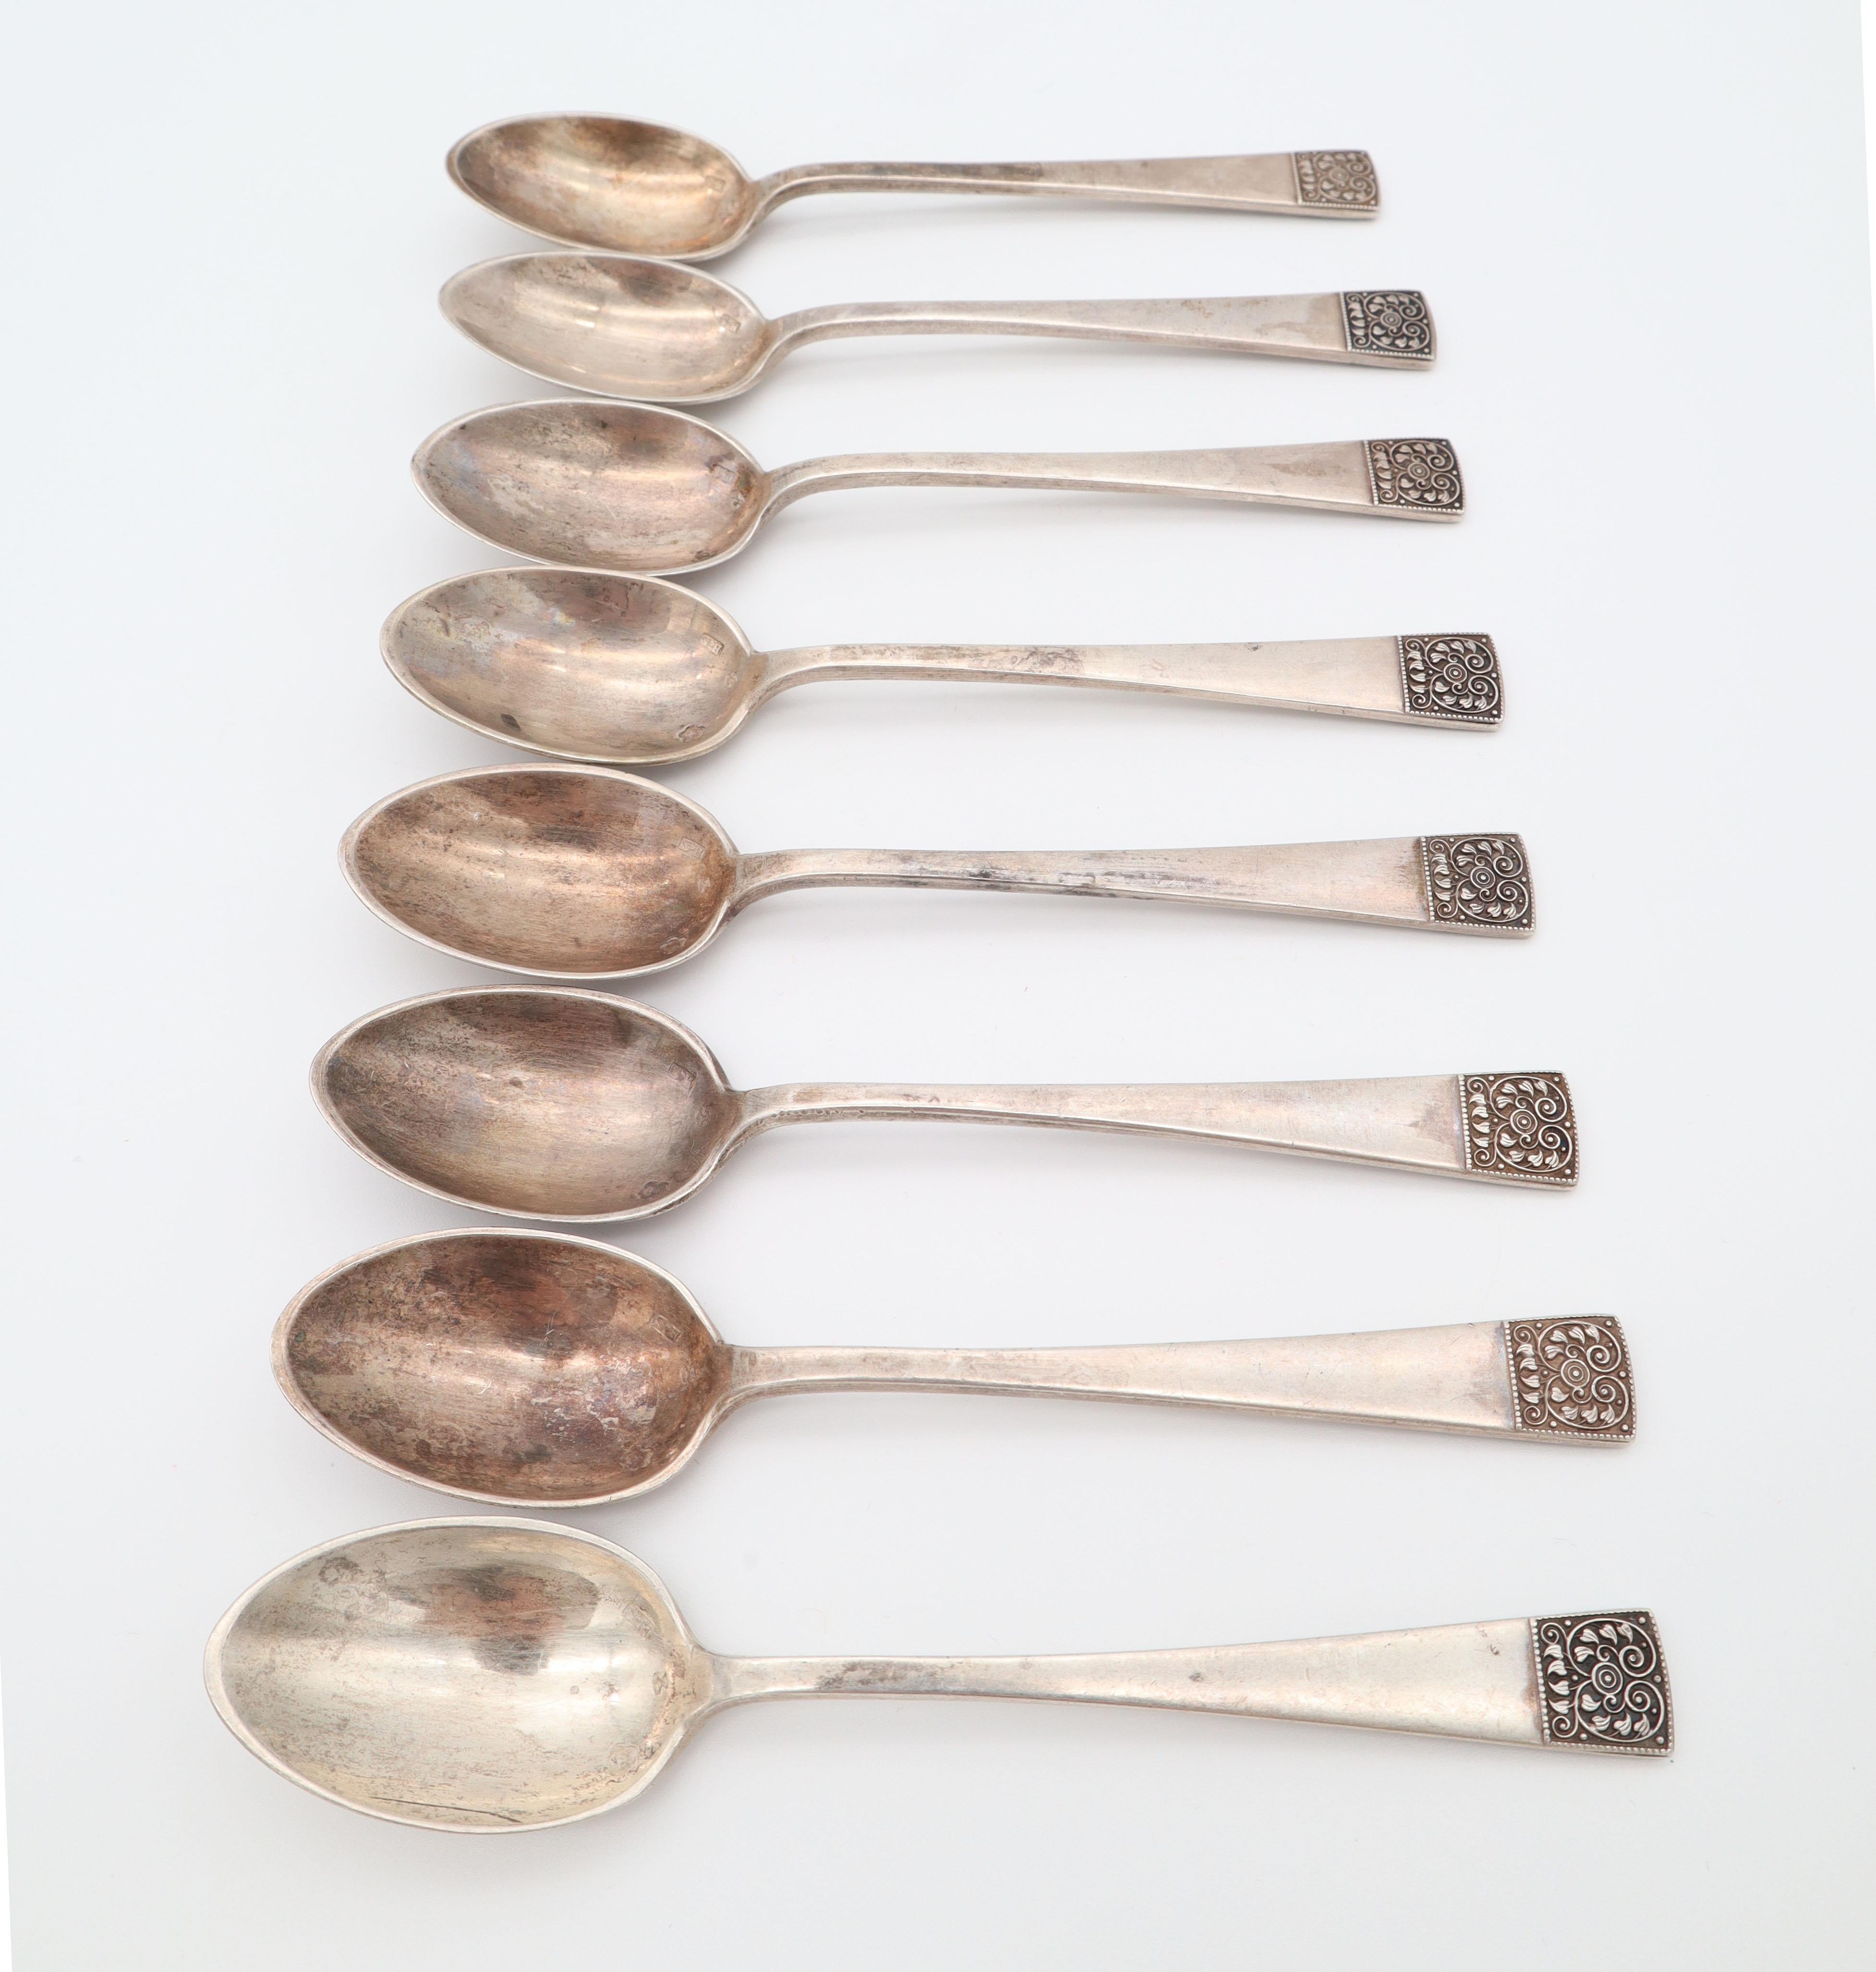 A set of 8 Vienna Secessionist teaspoons / coffee spoons made of sterling silver,. Style and Design shows close vicinity to Josef Hoffmann, and the Wiener Werkstatte Workshop. Vienna around 1910.
Viennese Diana’s head mark in a cloverleaf